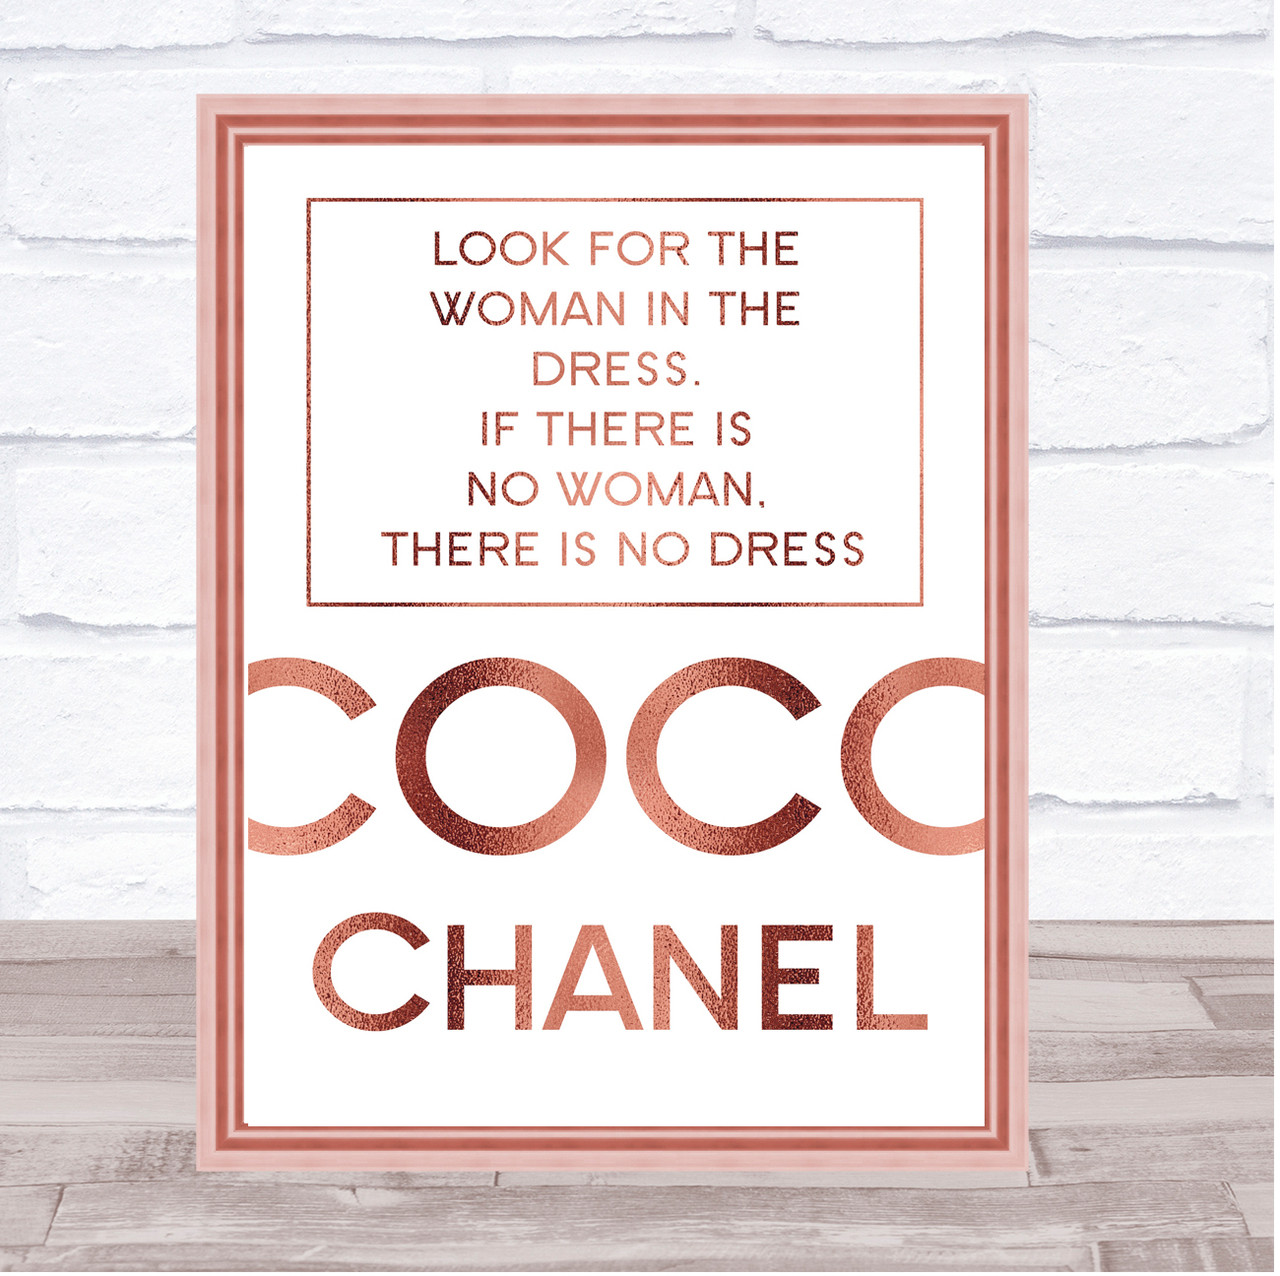 Coco Chanel Quote print. A woman can be over dressed Poster